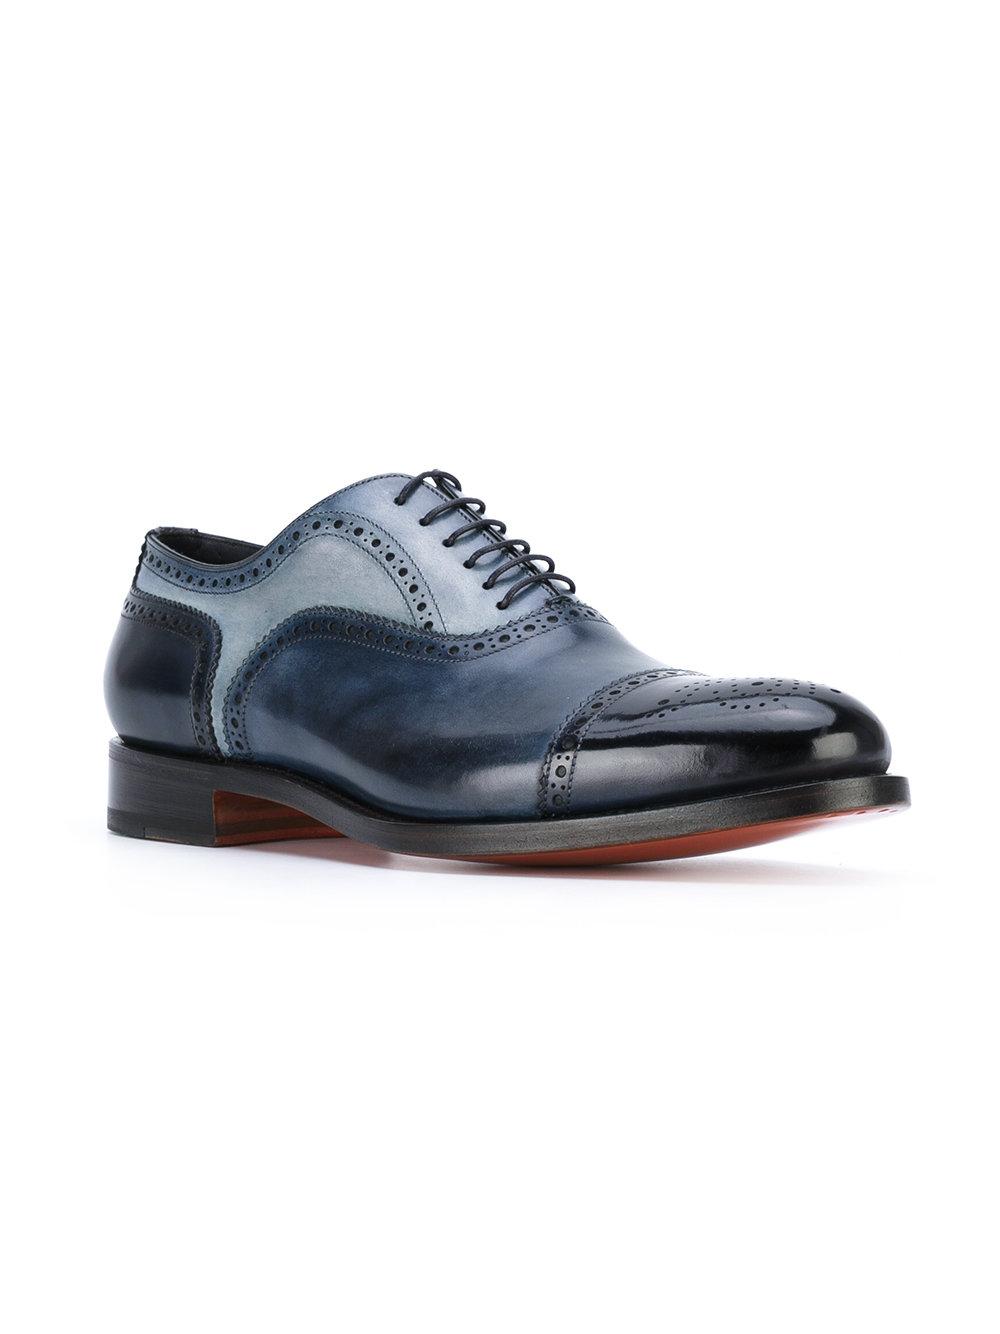 Lyst - Santoni Two-tone Brogues in Blue for Men